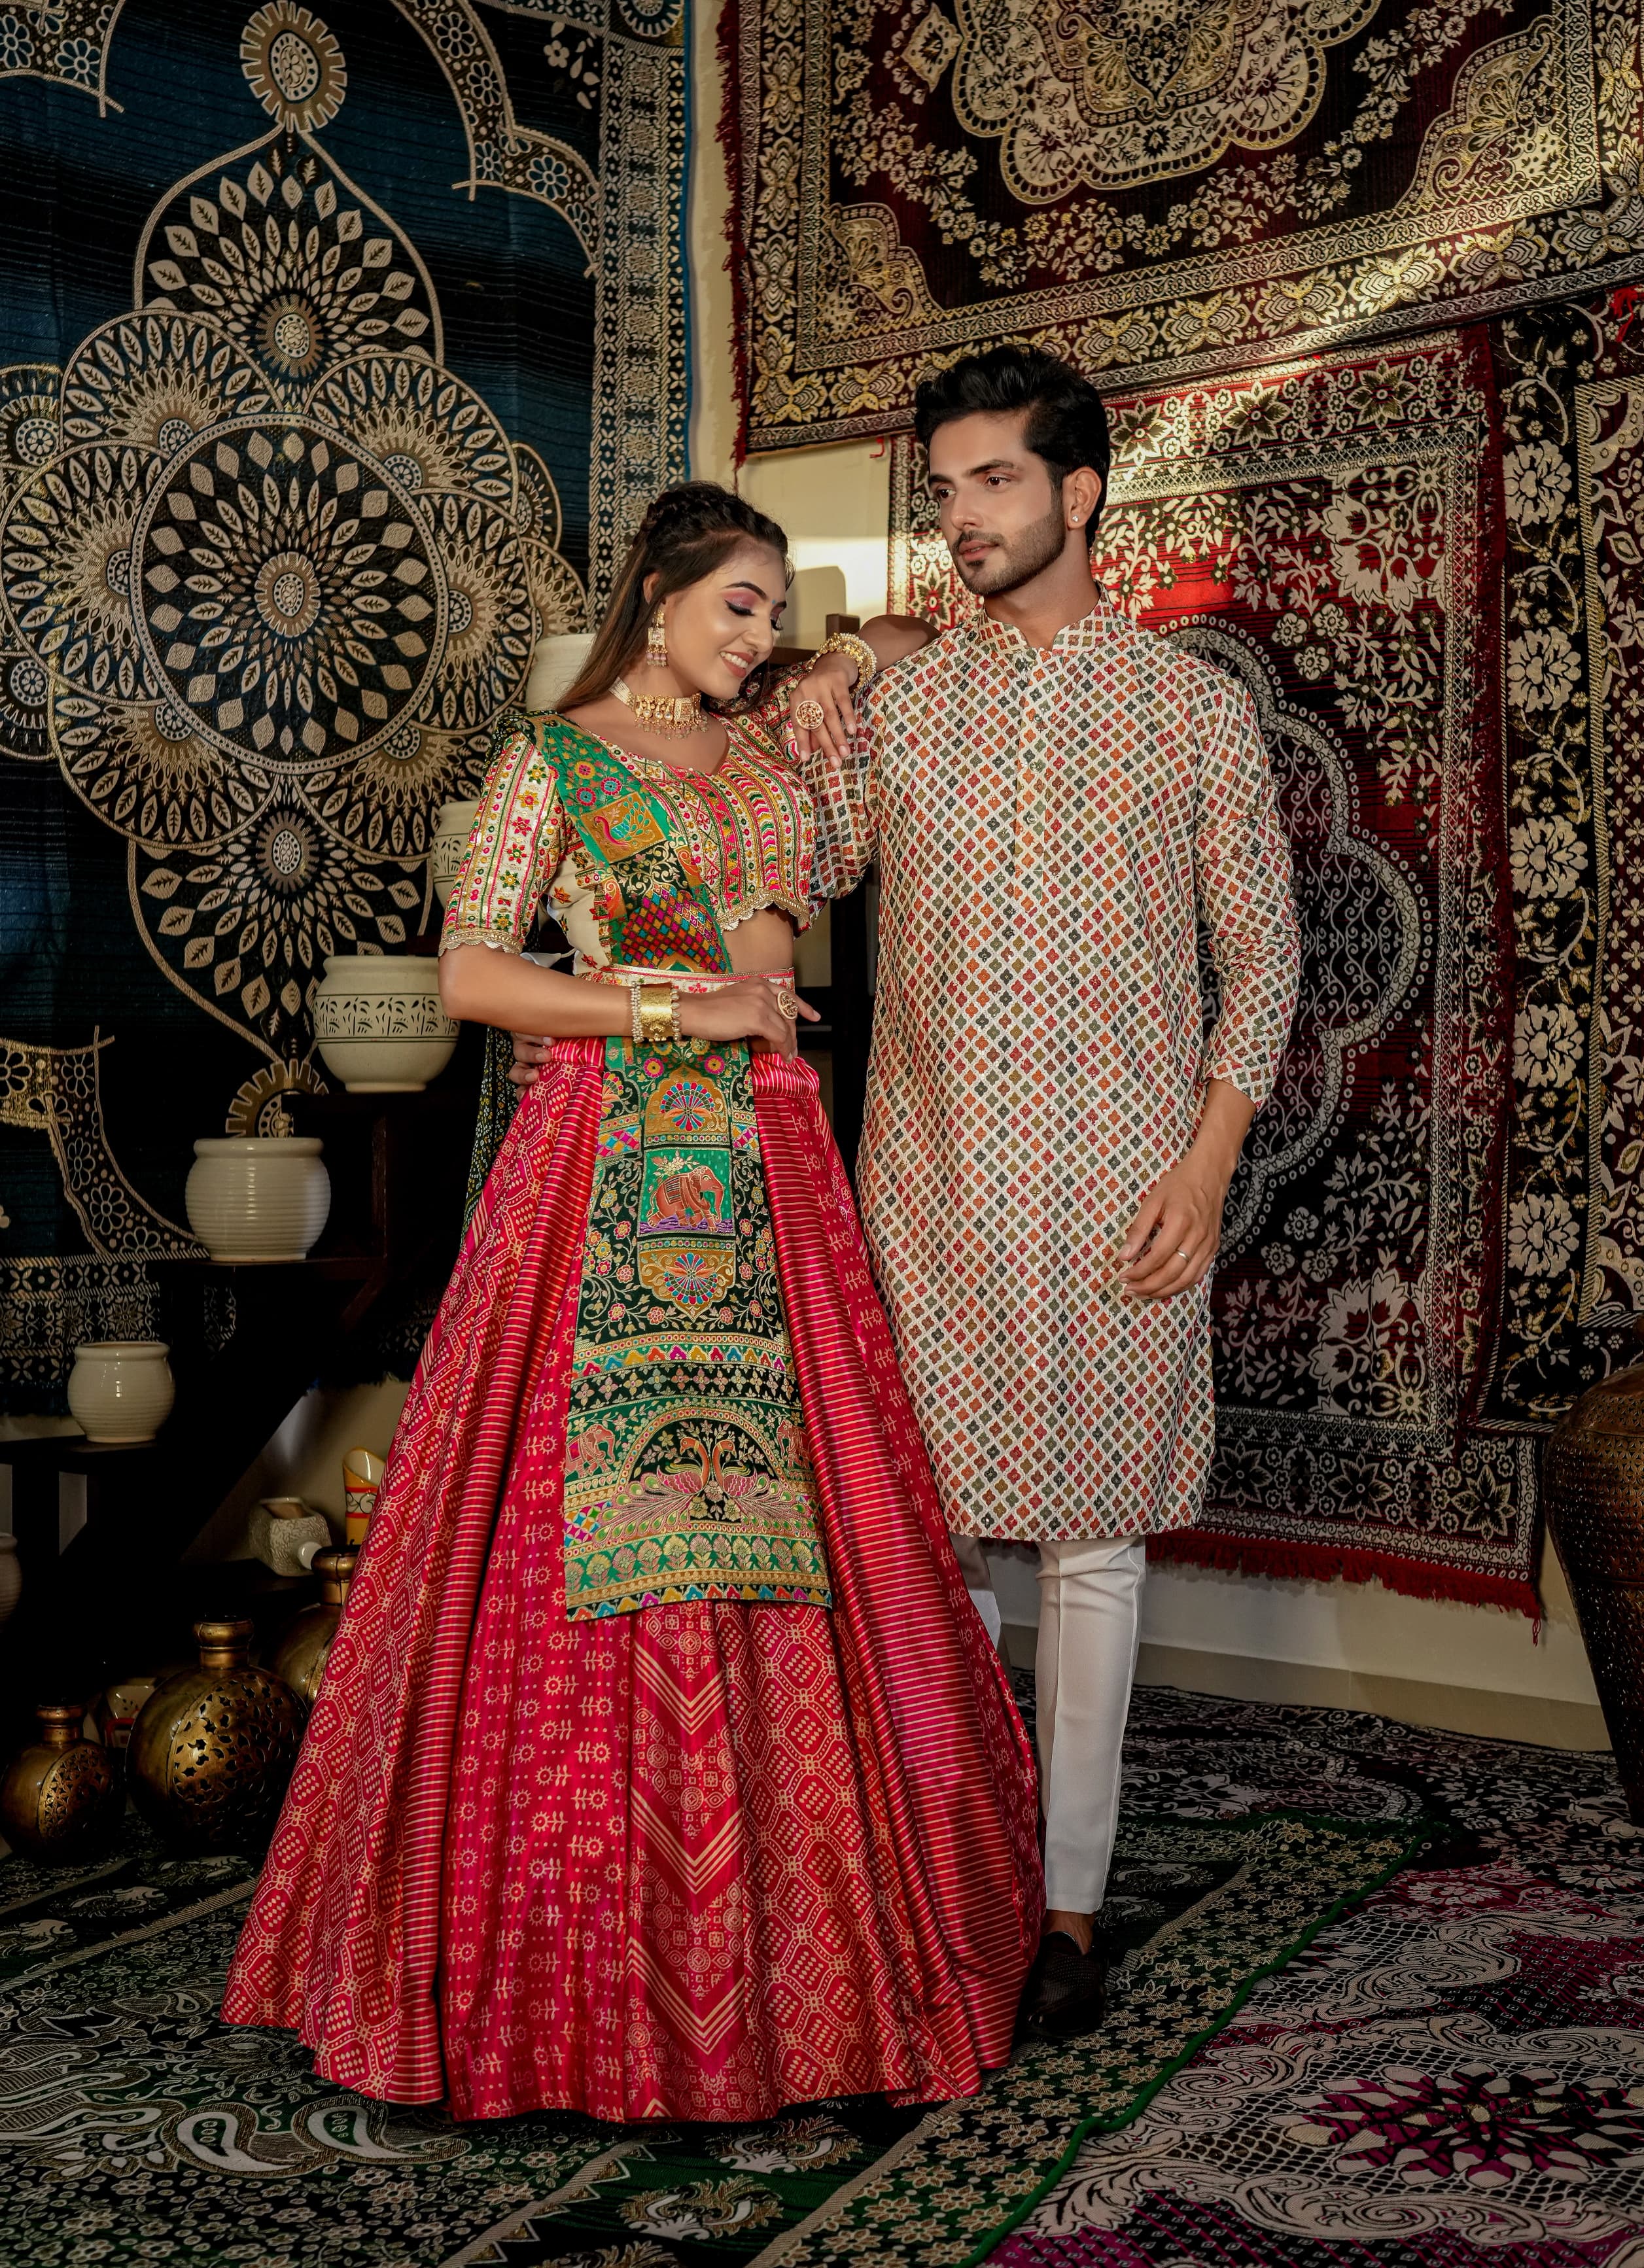 Pin by Archana on wedding | Wedding matching outfits, Engagement dresses, Couple  dress